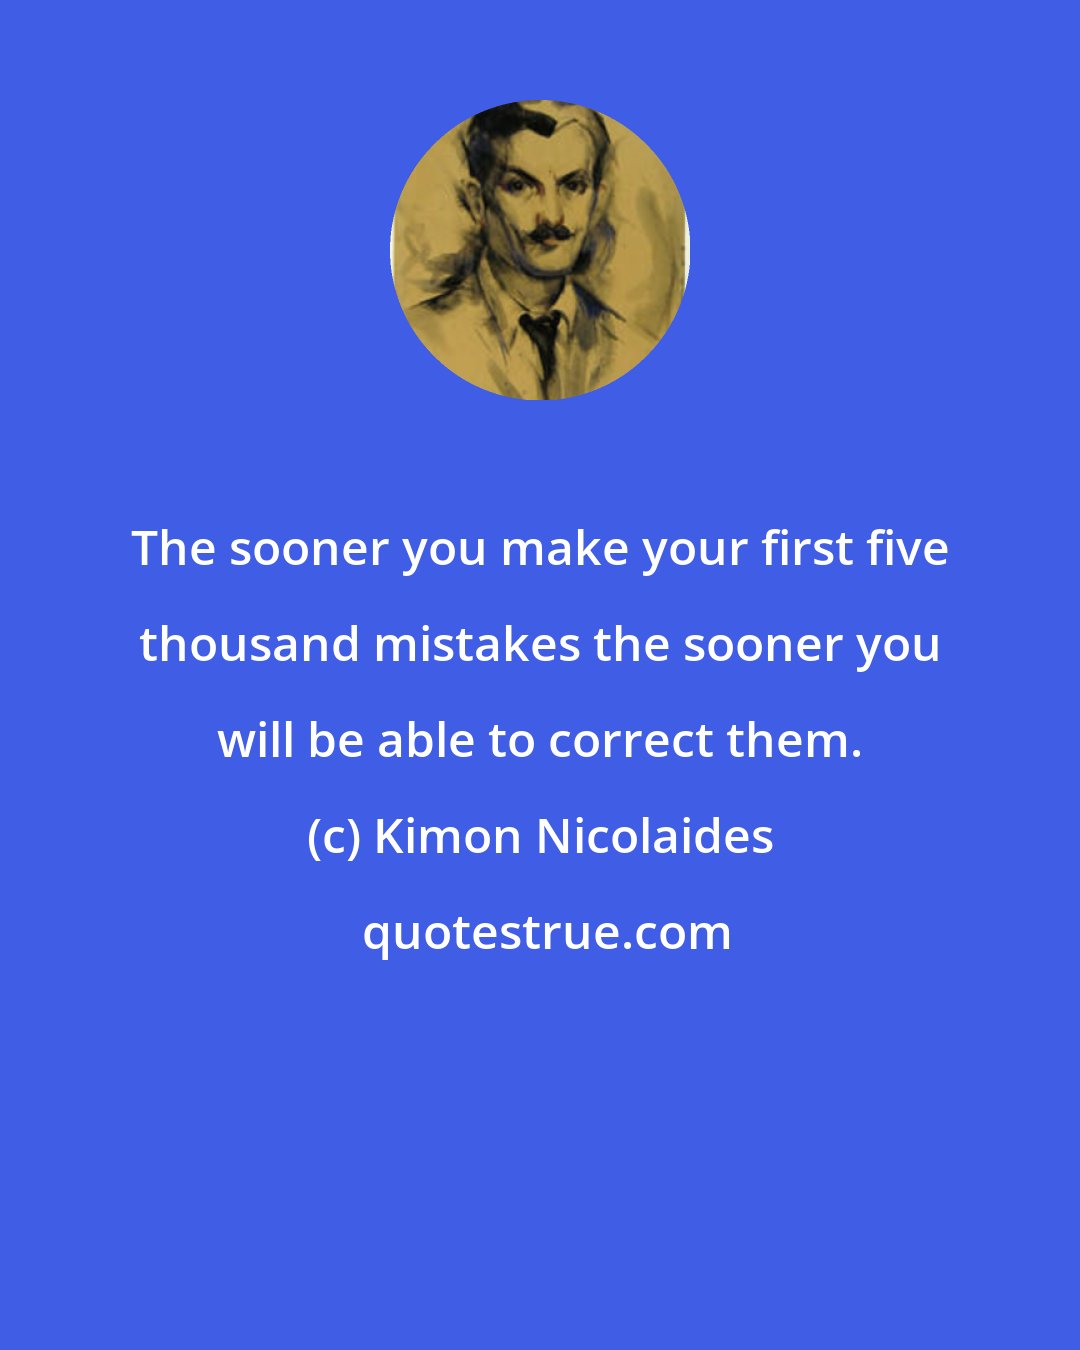 Kimon Nicolaides: The sooner you make your first five thousand mistakes the sooner you will be able to correct them.